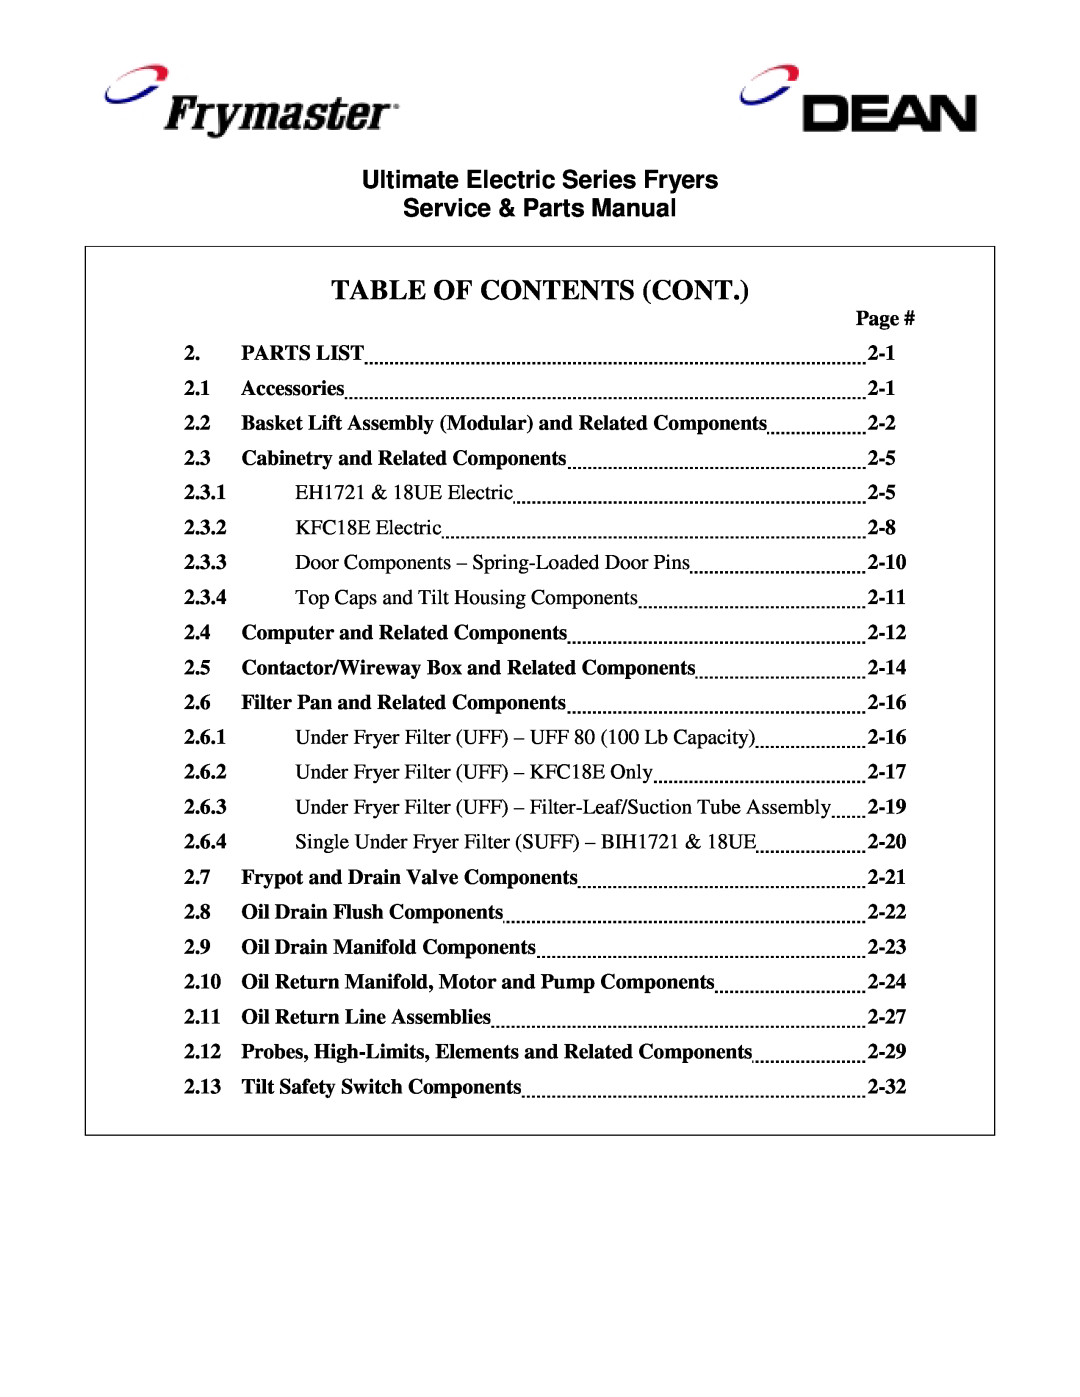 Frymaster manual Table Of Contents Cont, Ultimate Electric Series Fryers, Service & Parts Manual 